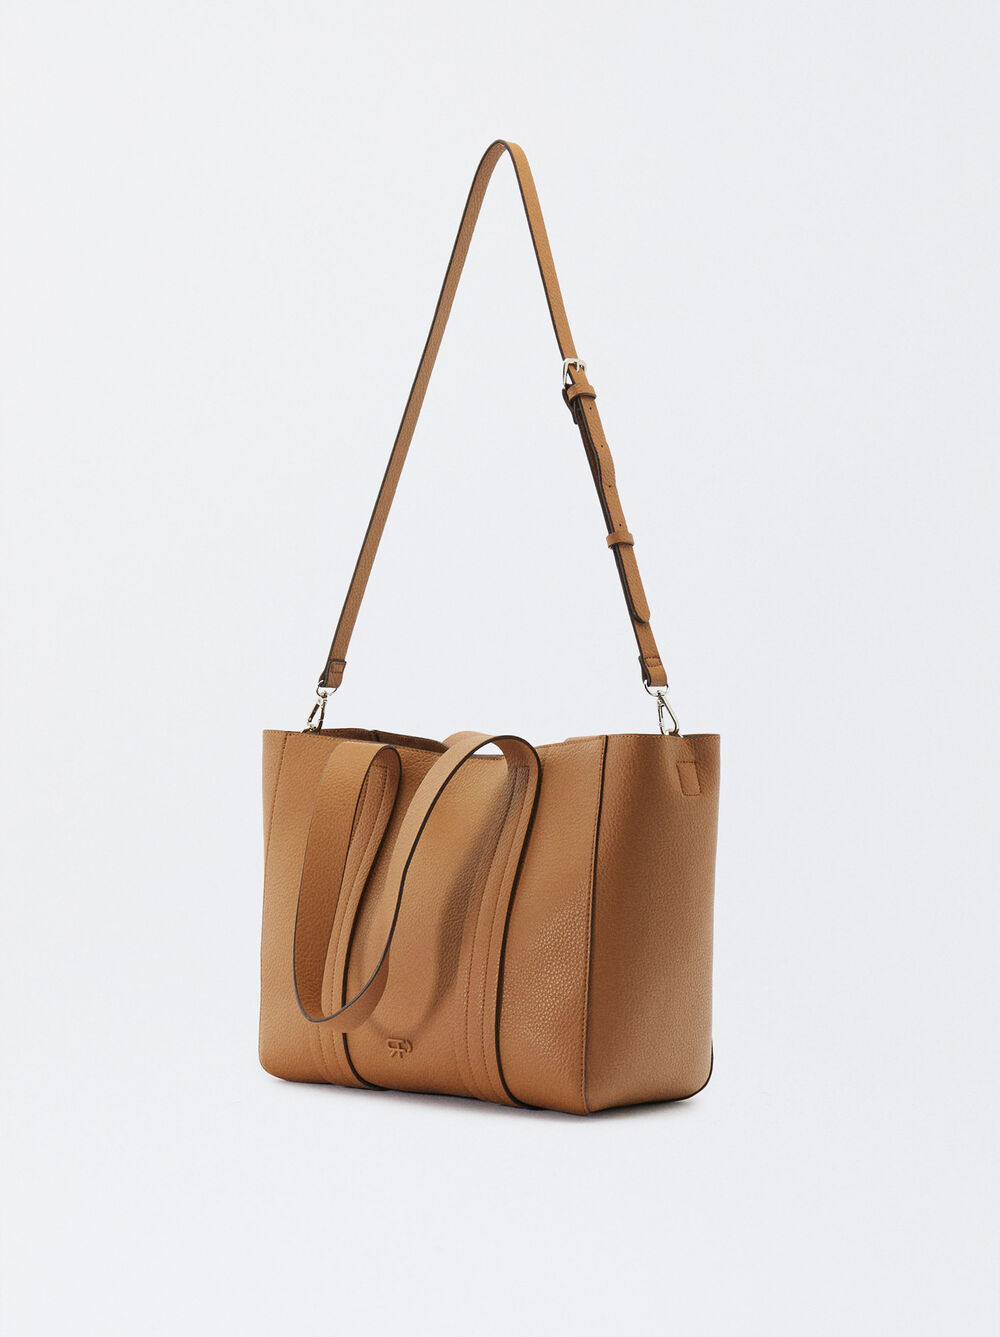 Sac Cabas Everyday Personnalisable